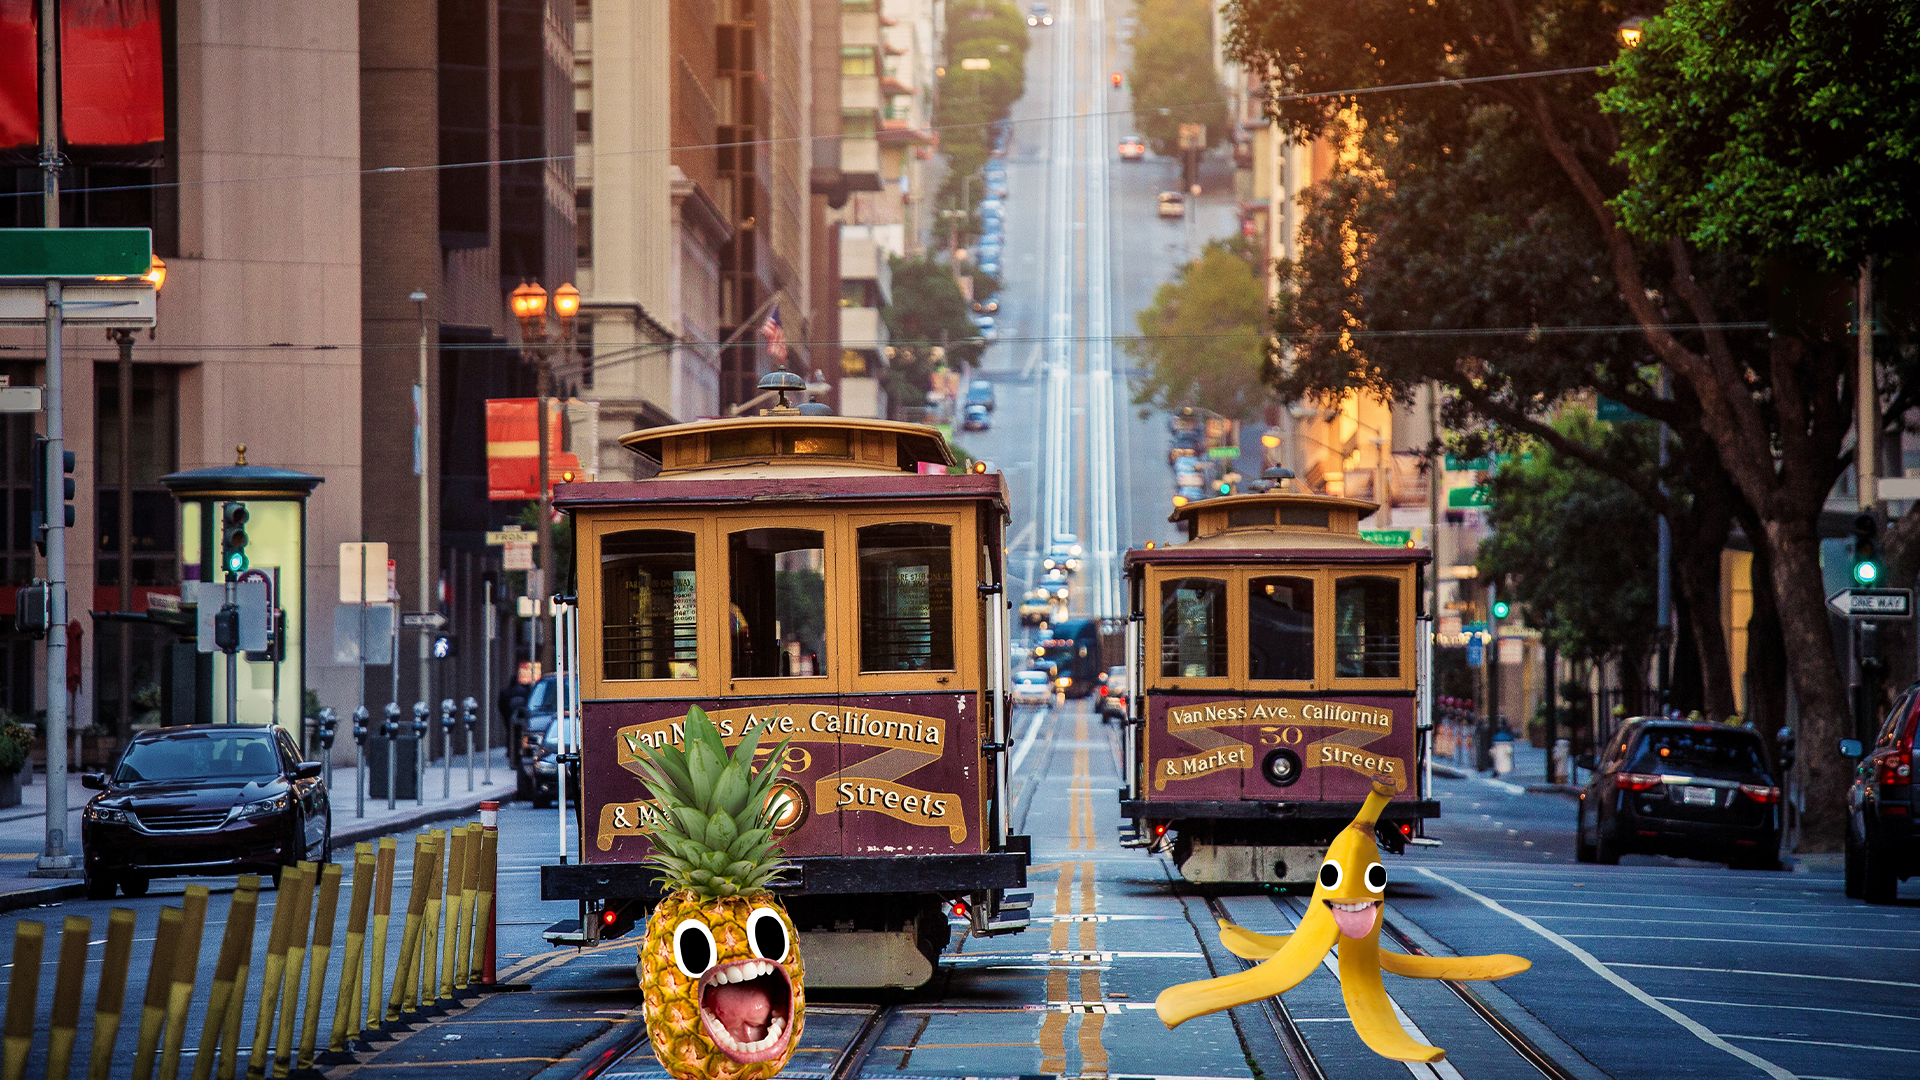 A pineapple and a banana skin scared of some trolley carts